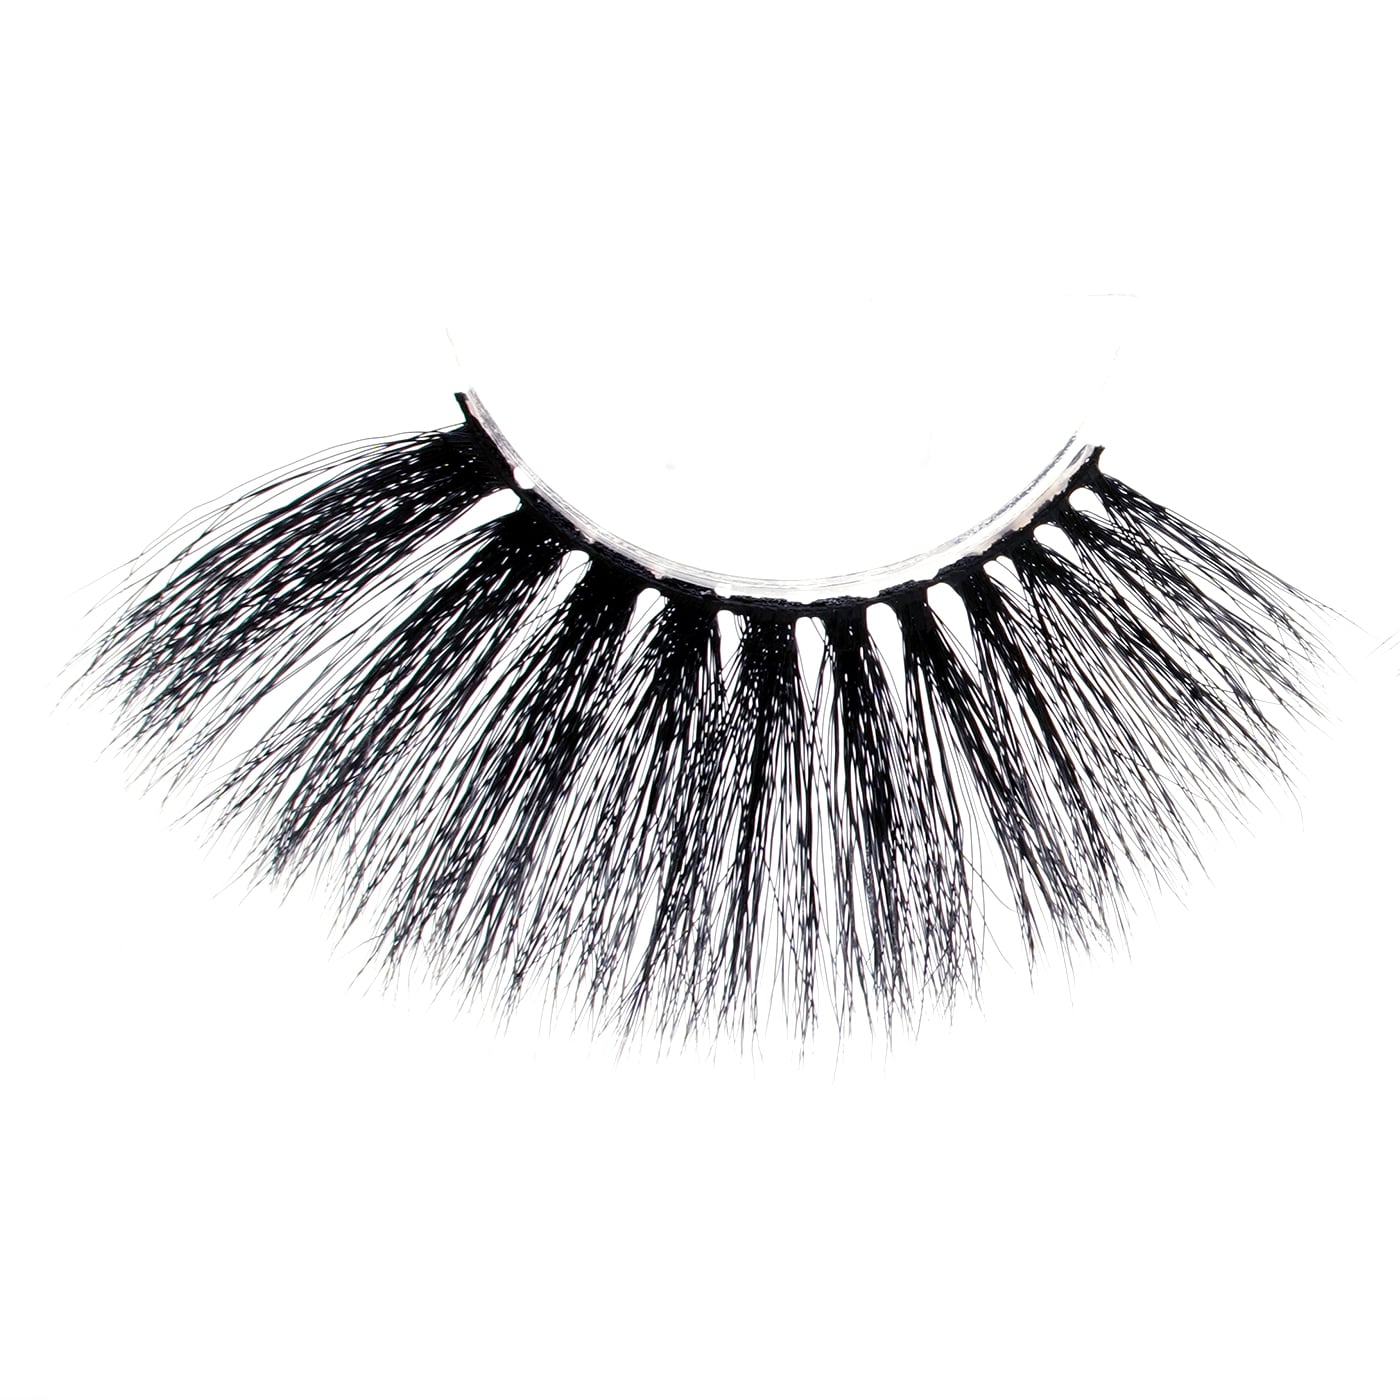  Ardell Faux Mink Strip Lashes 817 Black : Beauty